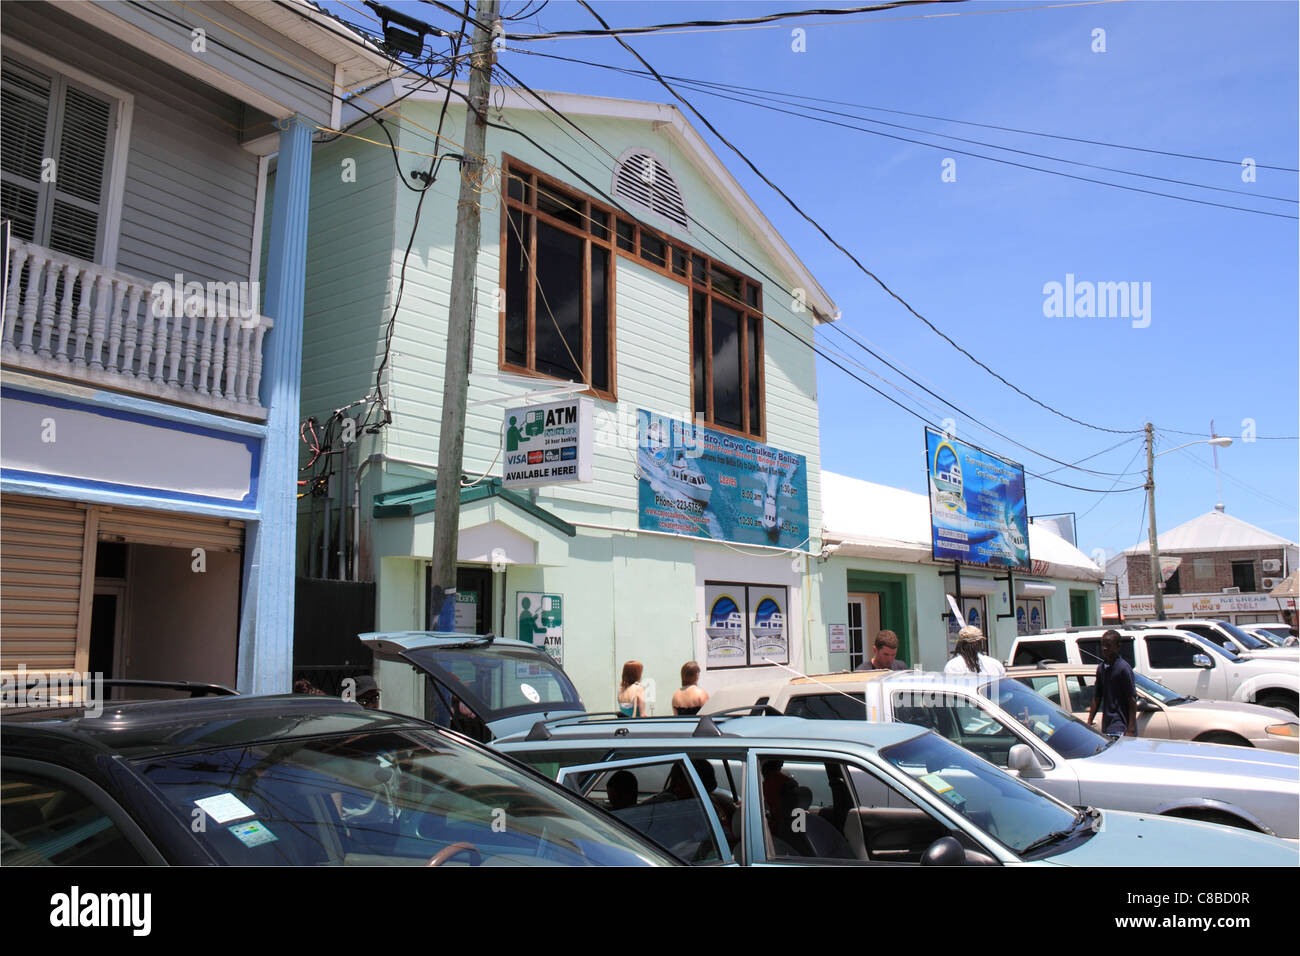 Marine Terminal, North Front Street, Fort George, Belize City, Belize, Caribbean, Central America Stock Photo